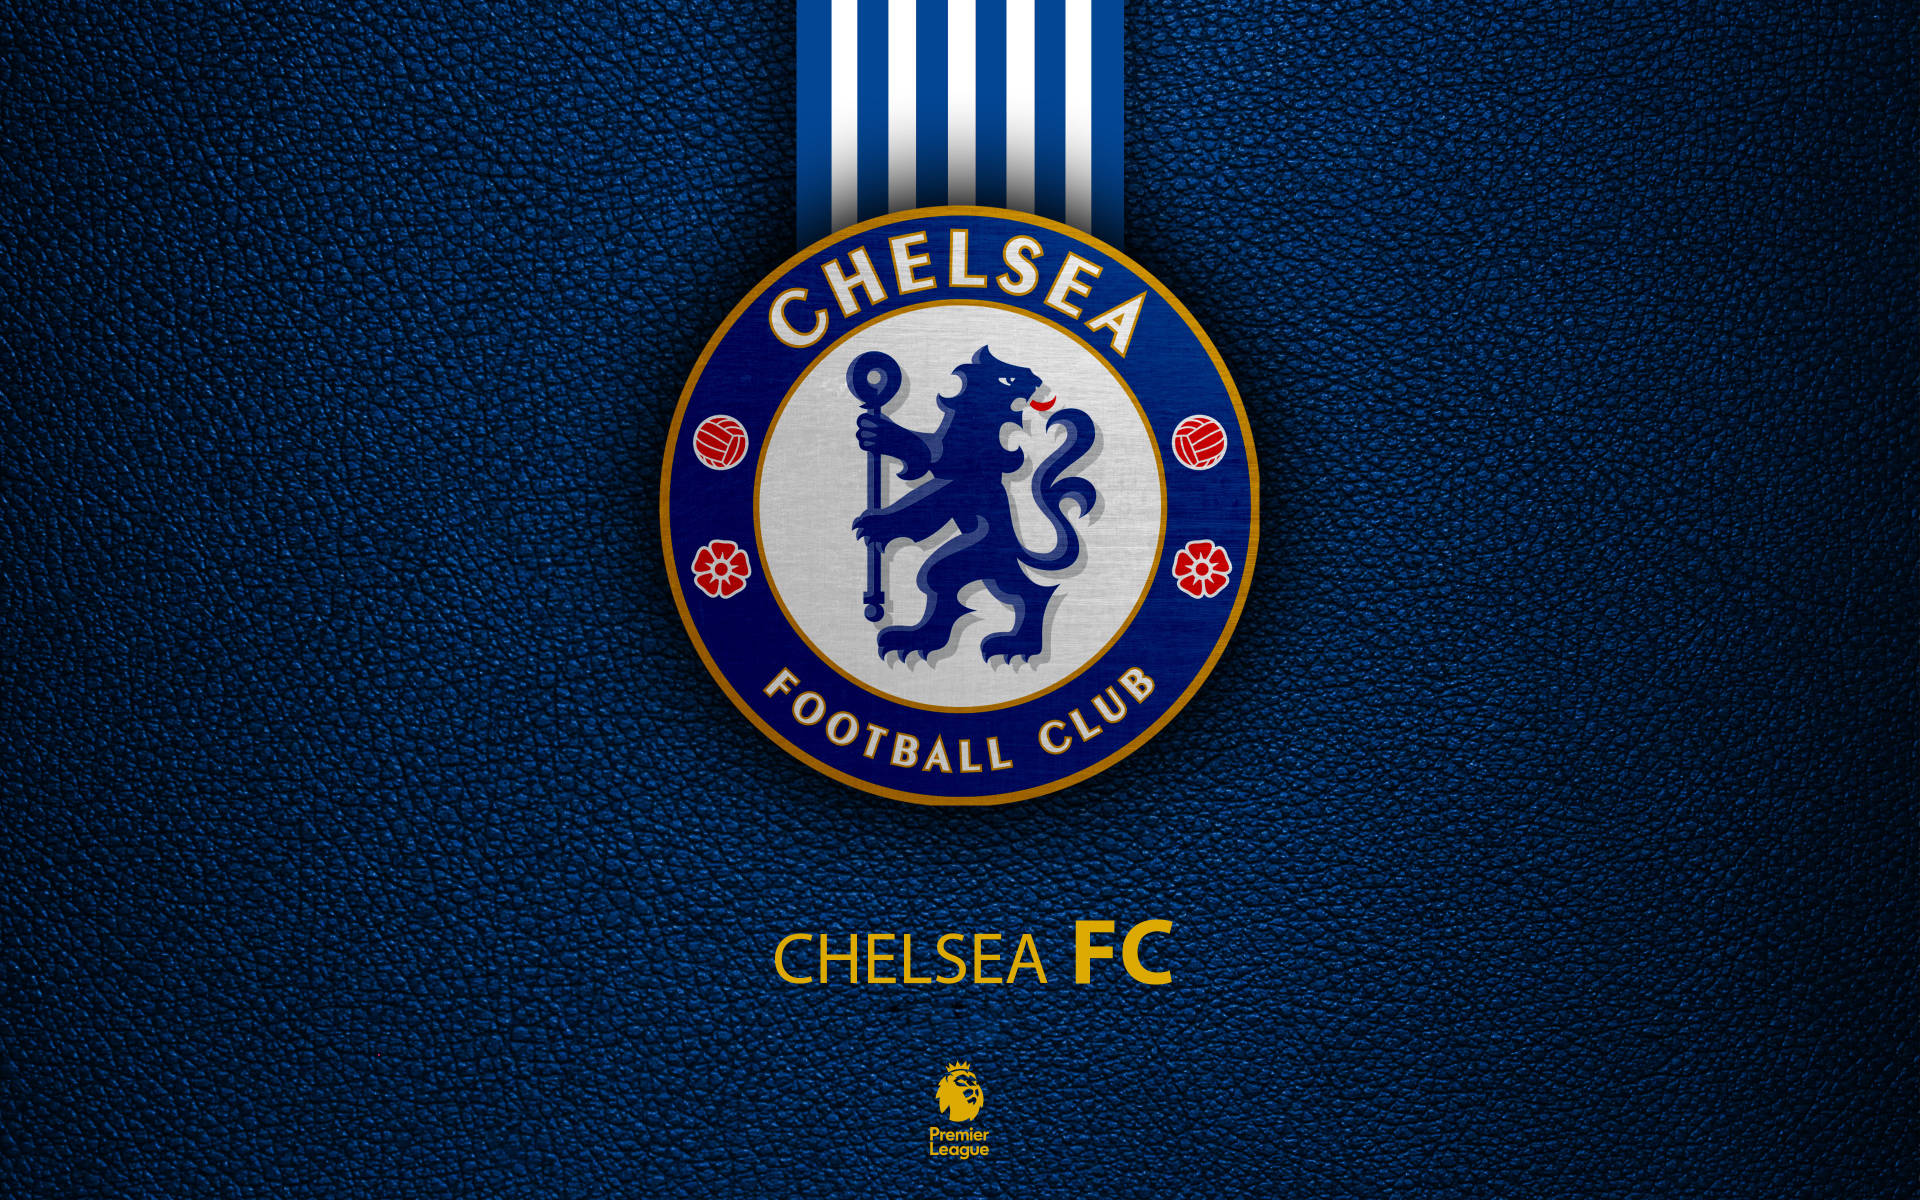 Chelsea Fc On Blue Leather Background